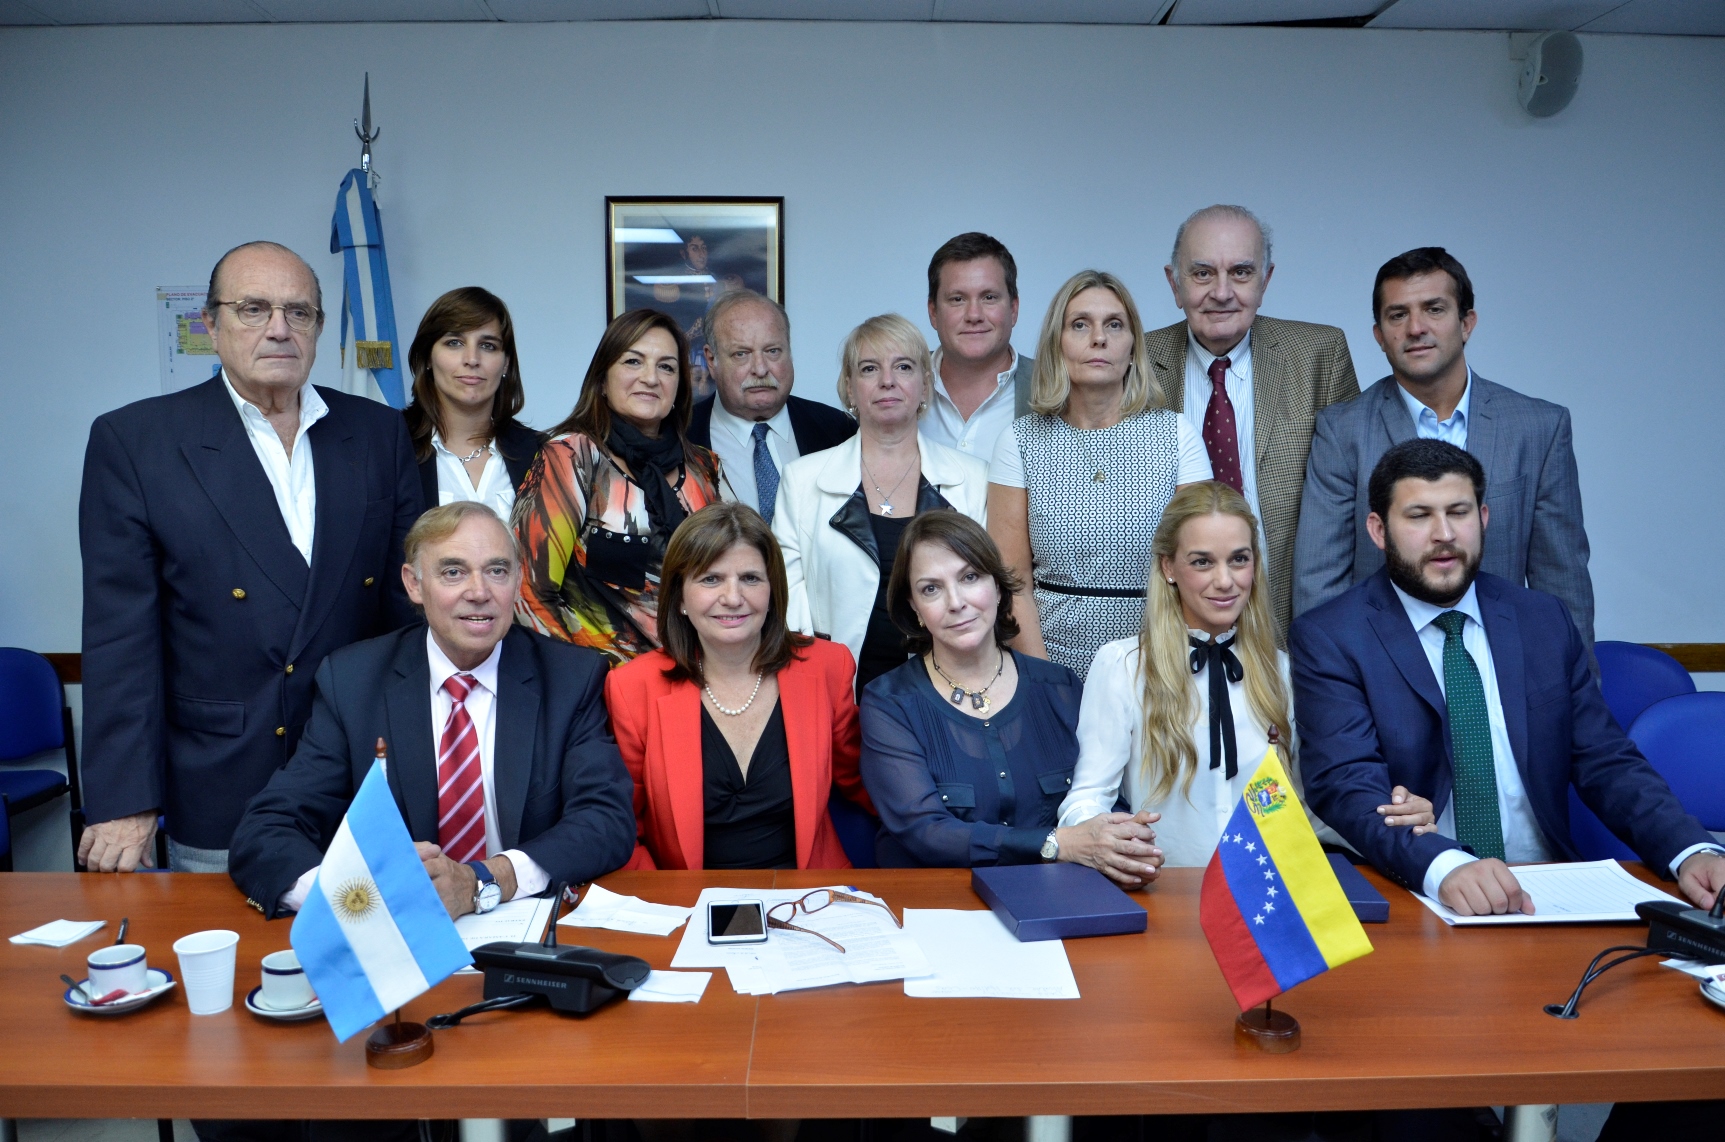 Argentinean congressmen called for the respect of human rights in Venezuela